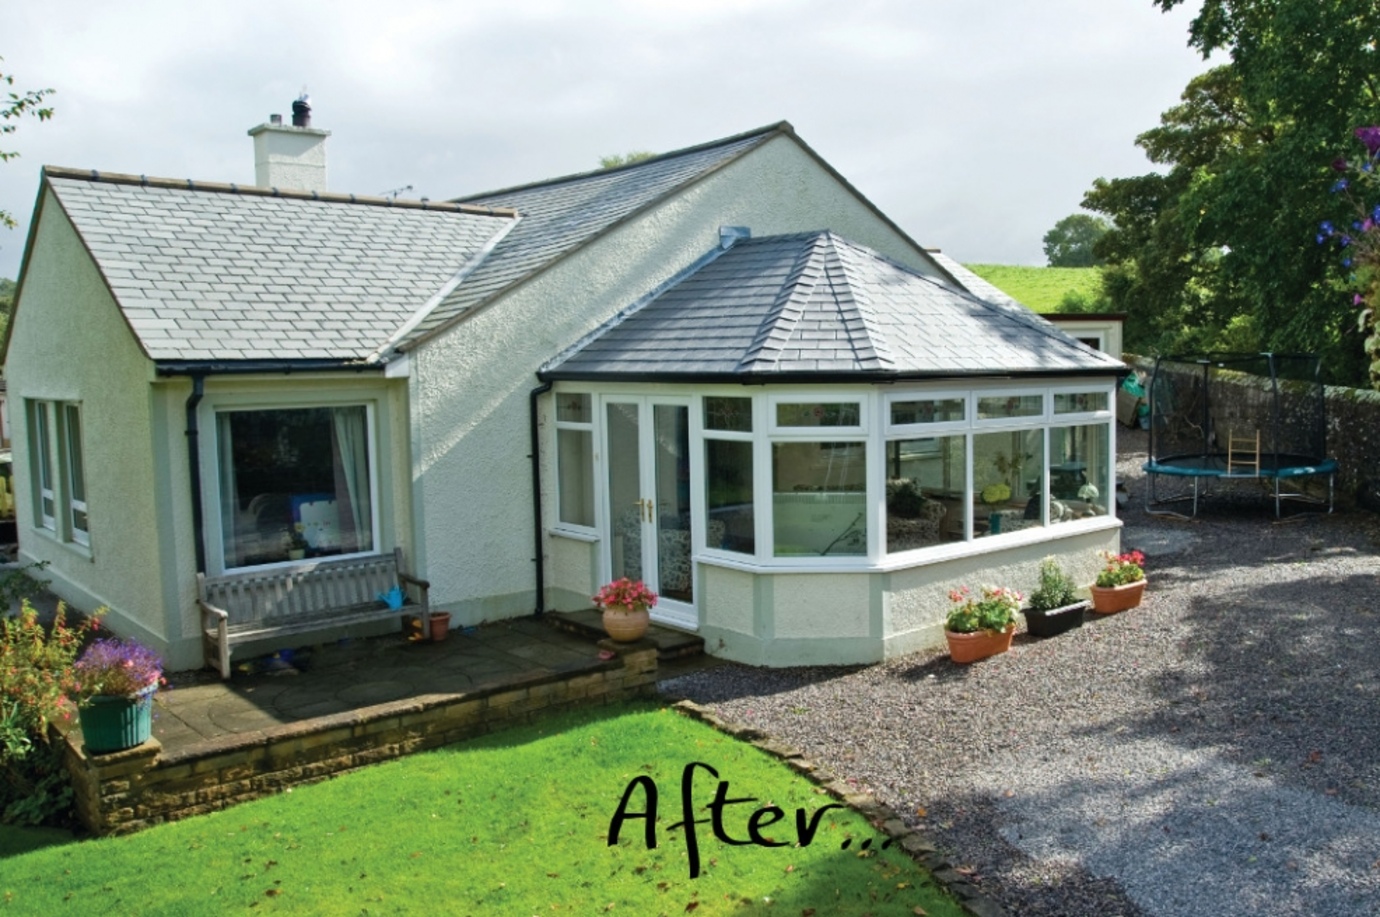 AFTER: Tiled roof conversion